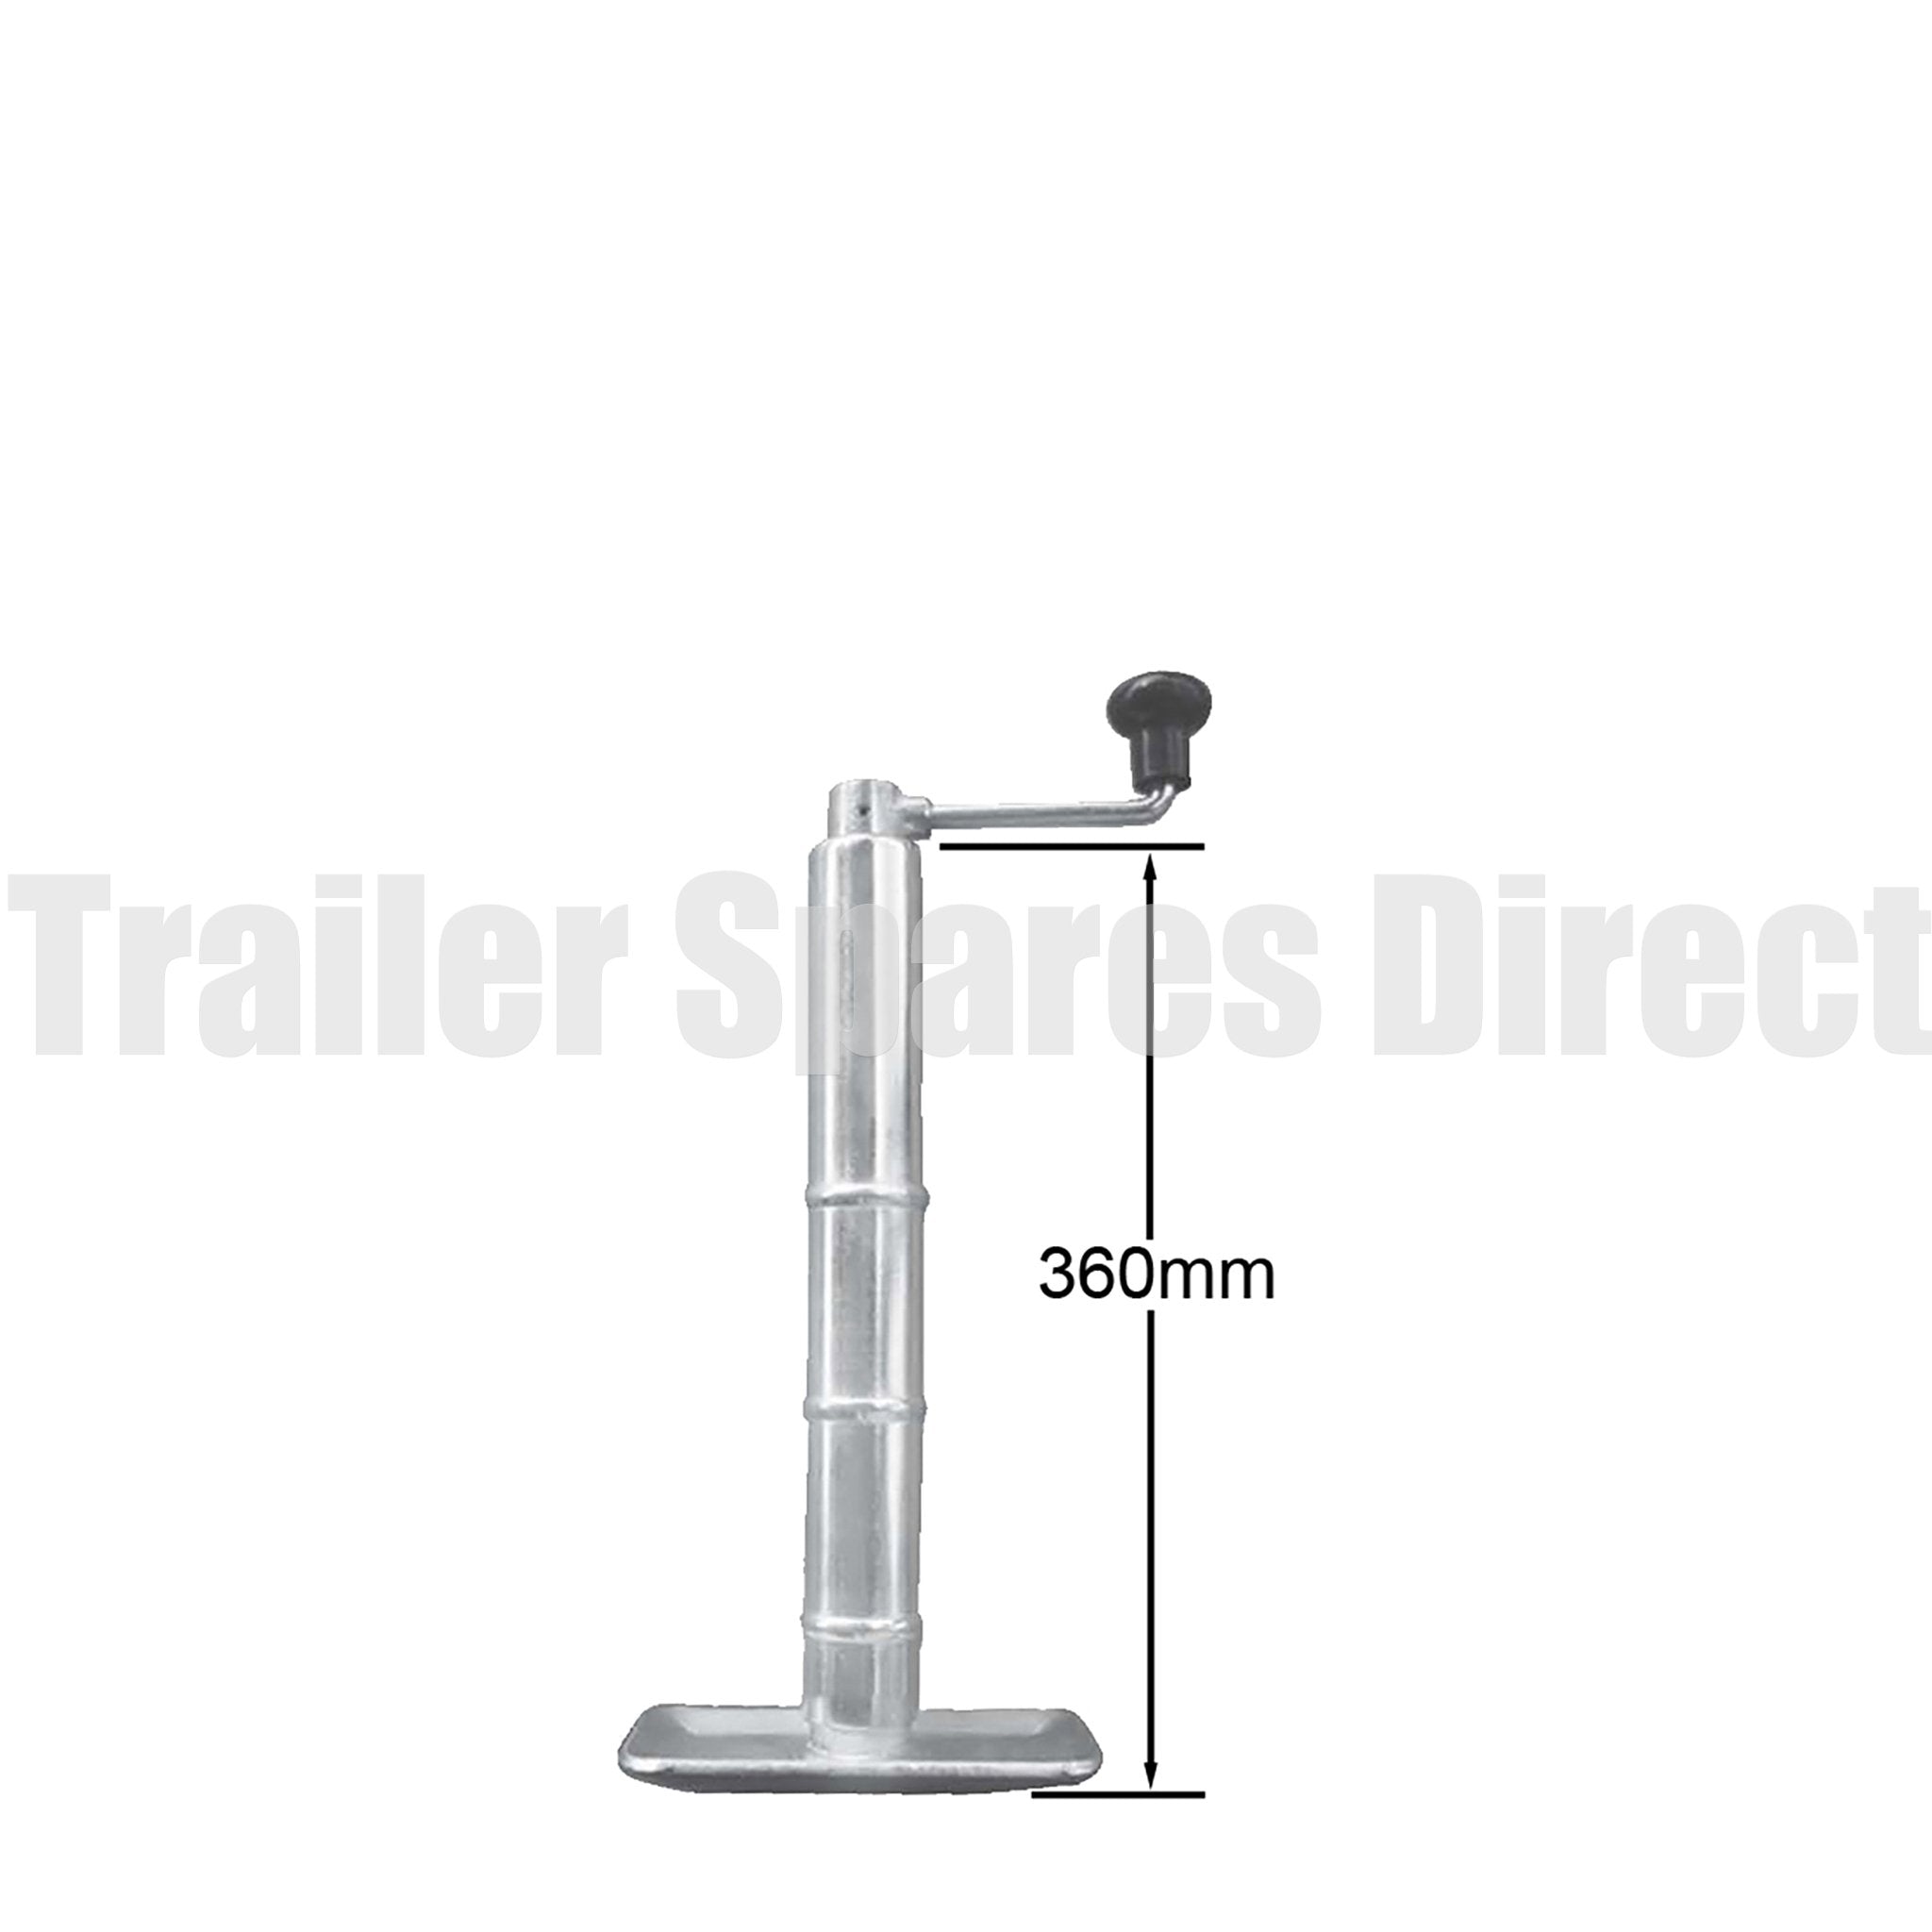 Top winding adjustable stand with clamp